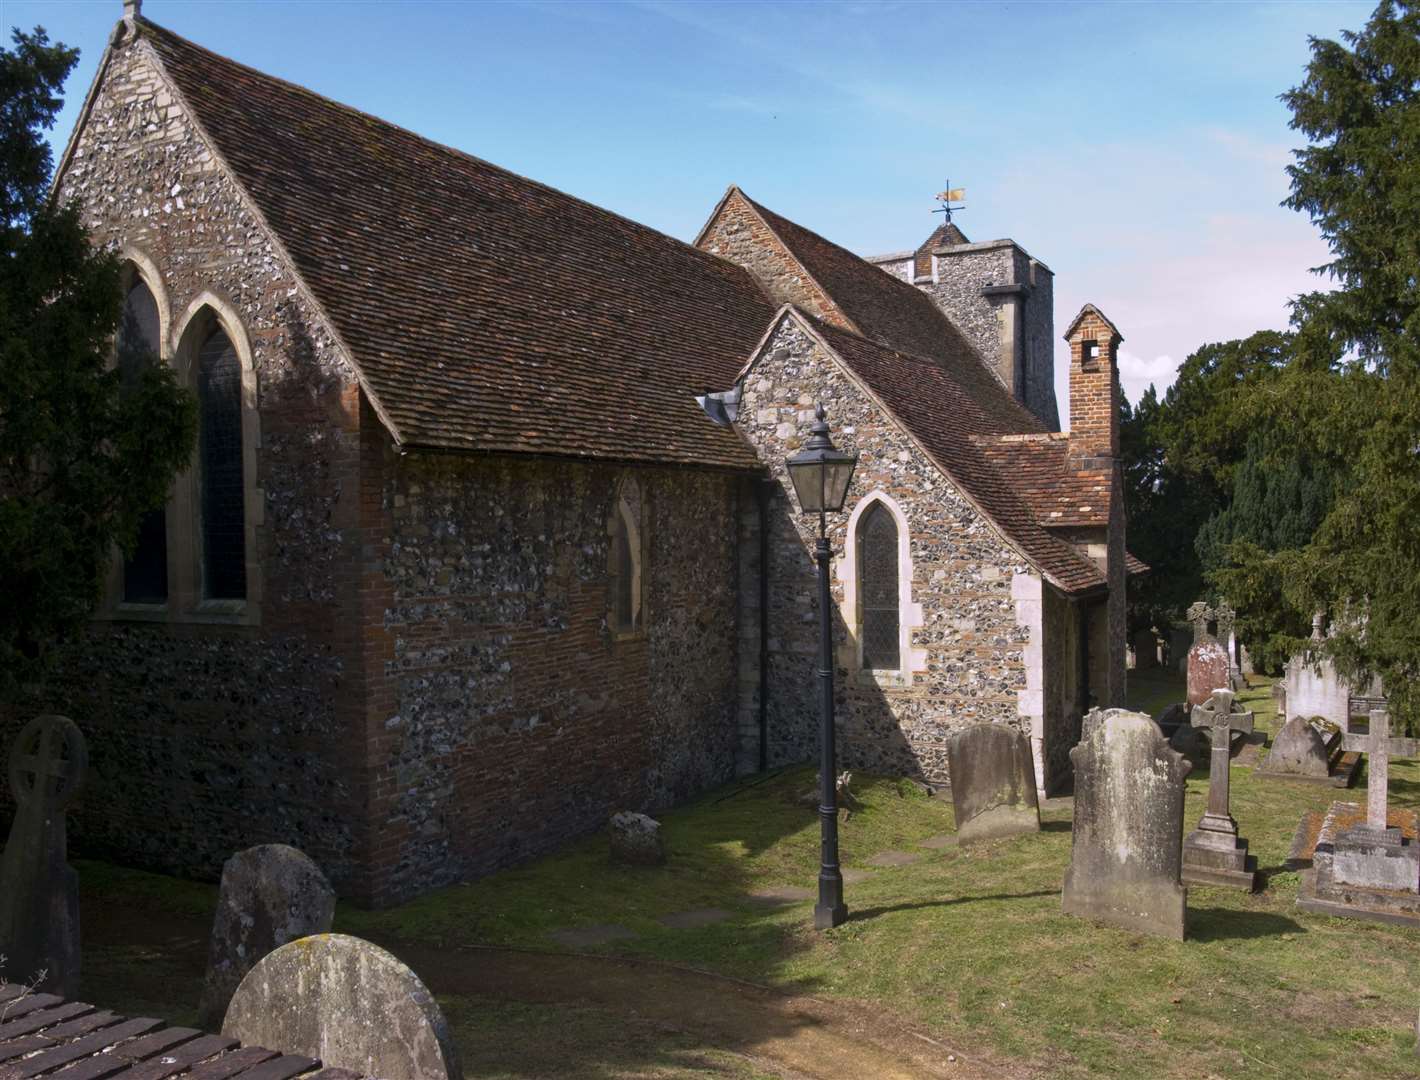 St Martin's Church is the oldest church in England